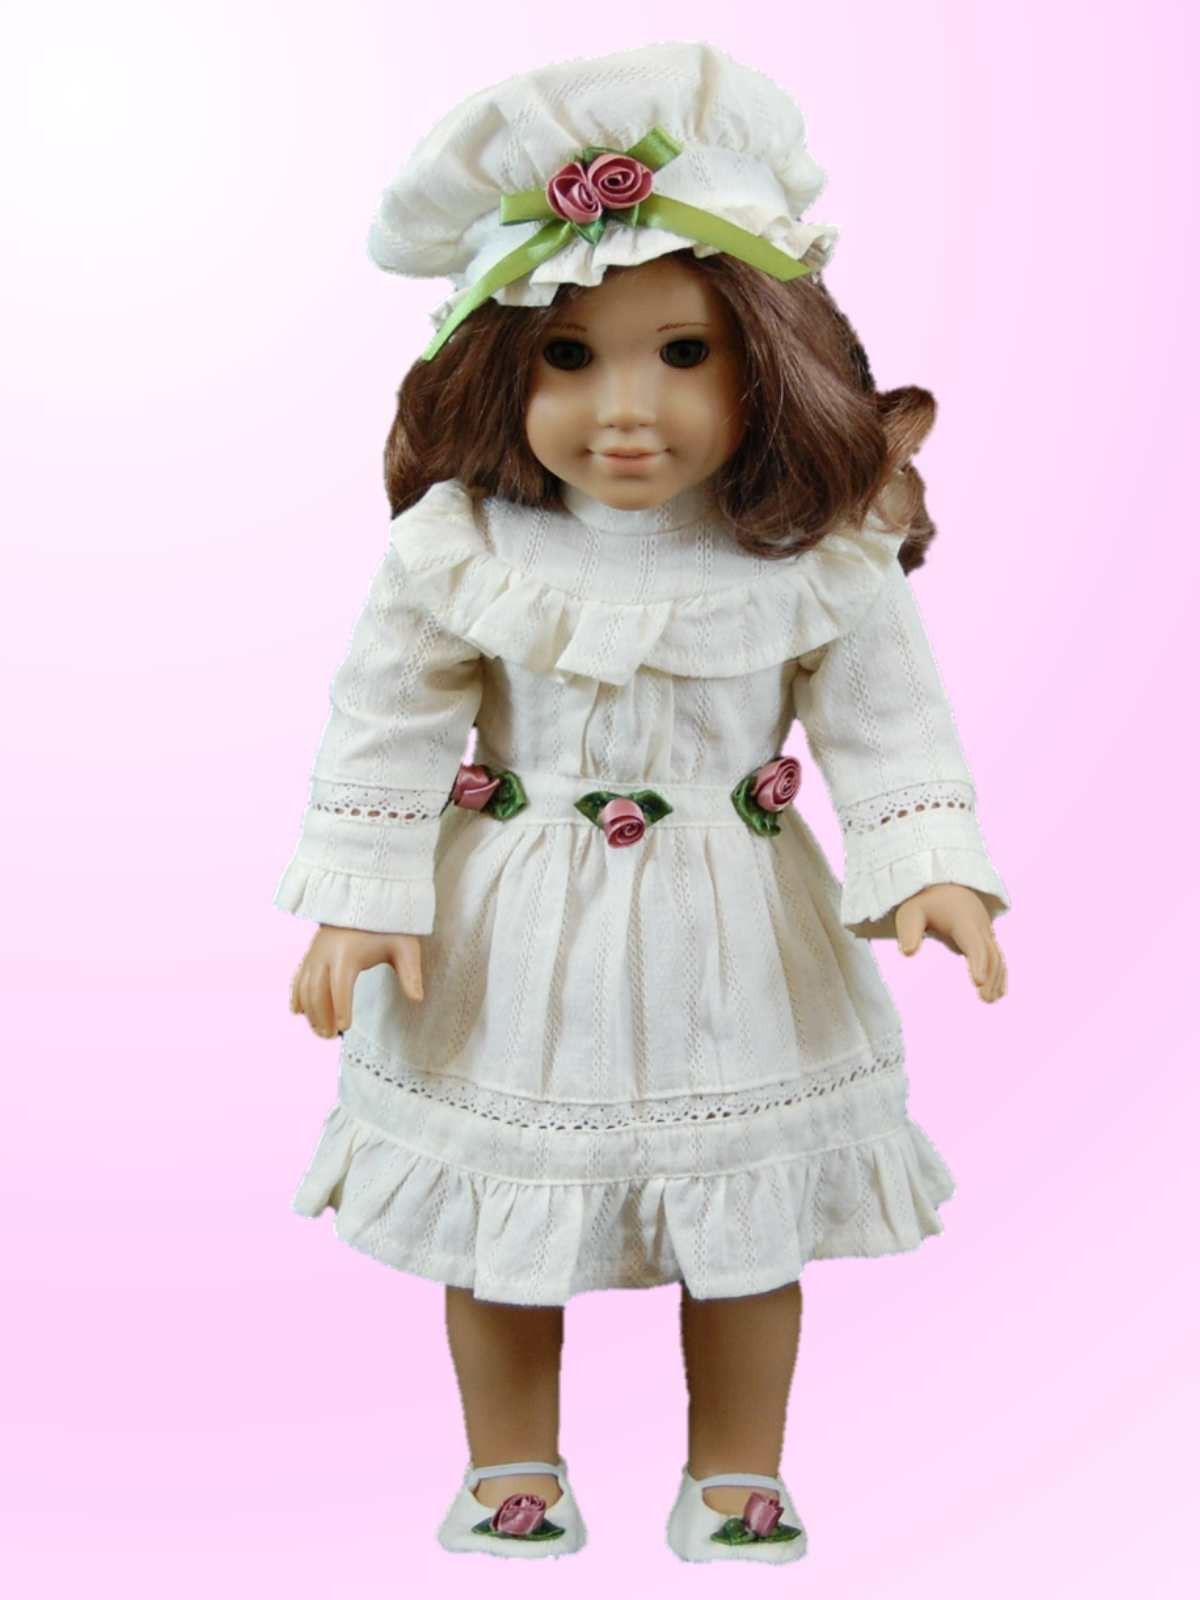 The Queen's Treasures 1900's Party Doll Dress Complete Outfit  for 18'' Dolls & American Girl